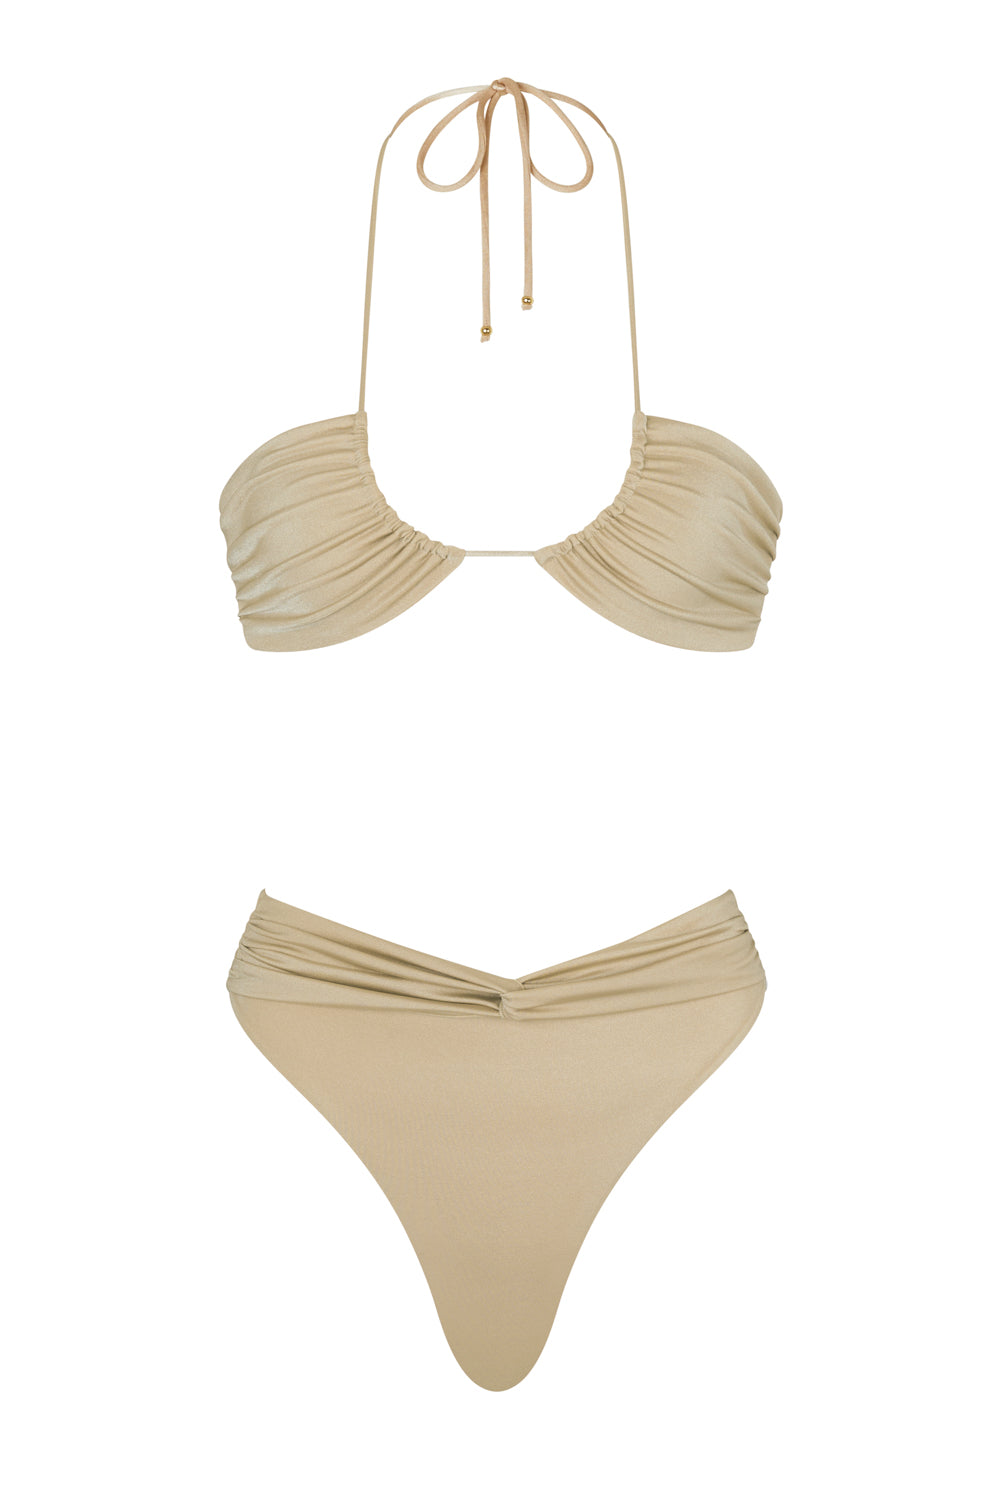 flook the label malani top analia brief swimwear gold product image front